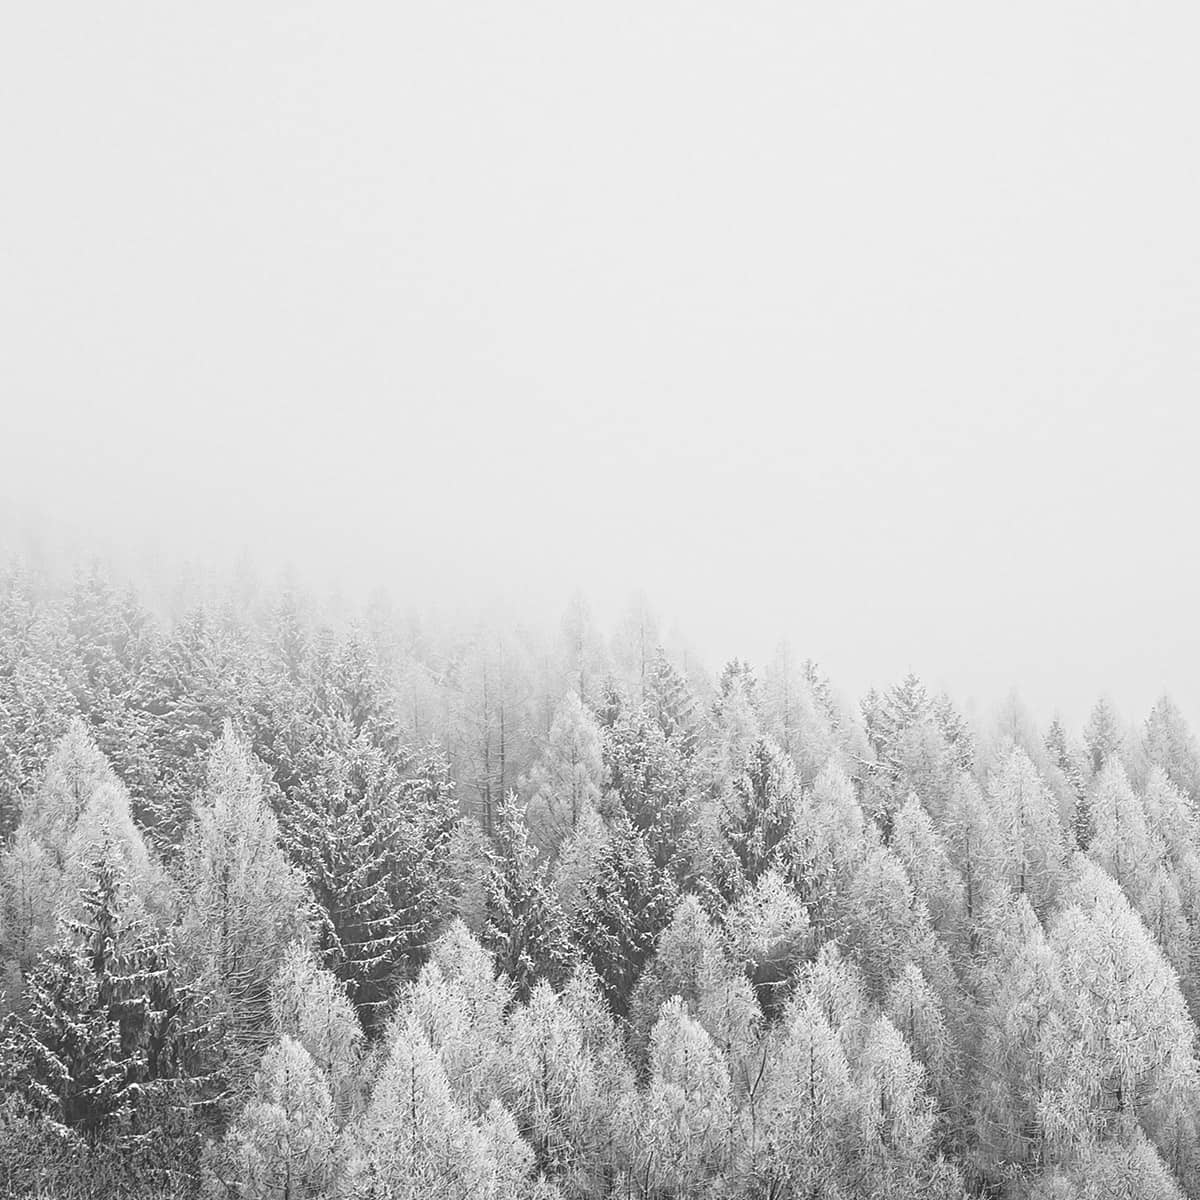 Forest of snowy trees amidst a foggy backdrop creating monotone landscape